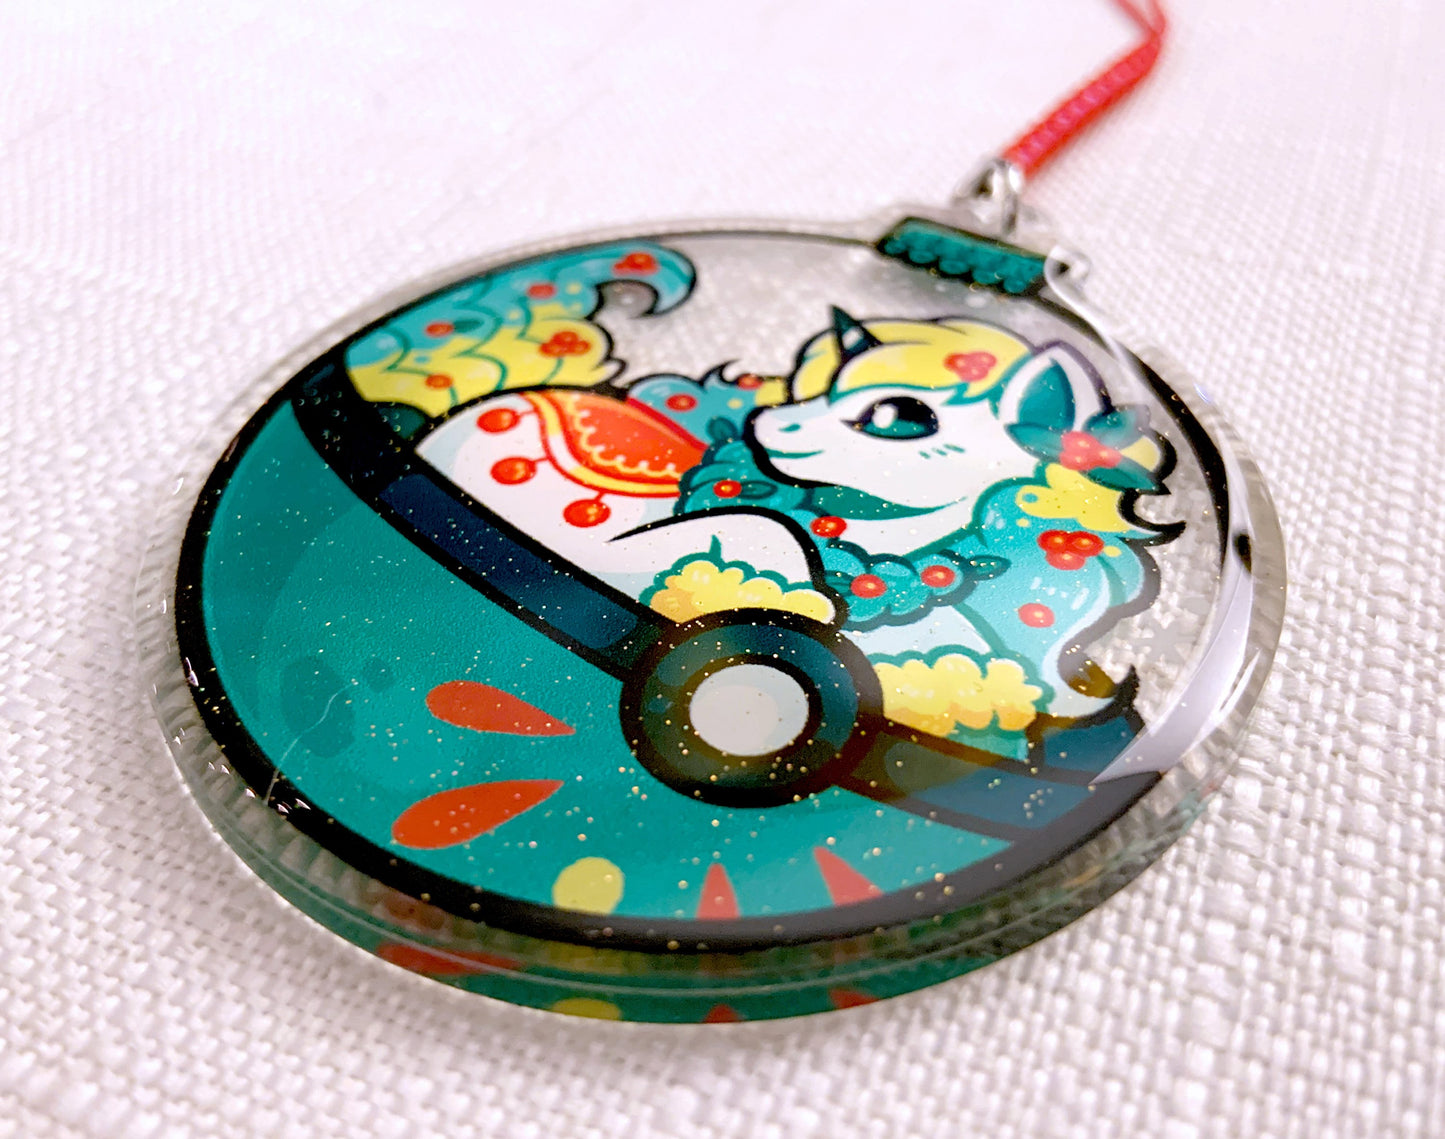 Glaceon 2.5" Acrylic Ornament